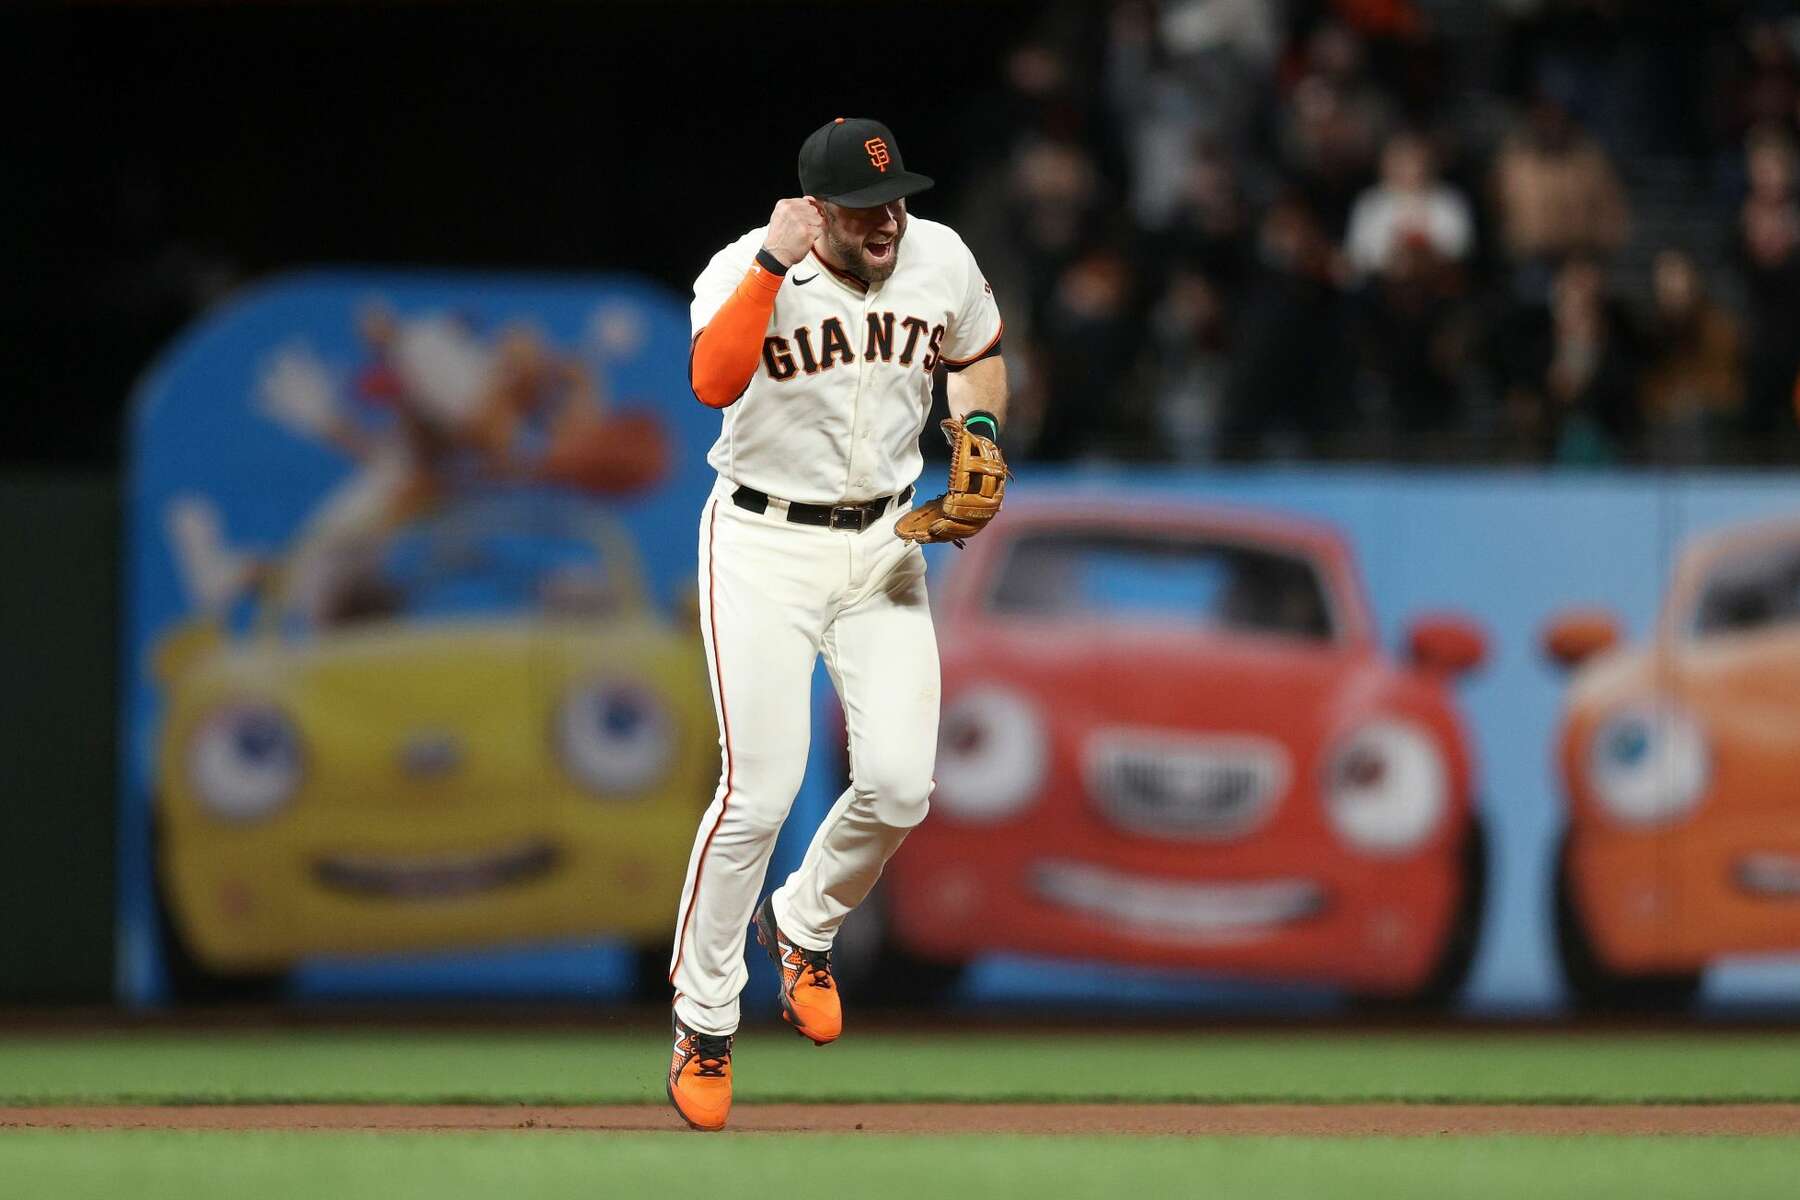 SF Giants' Oracle Park has a quirk that could affect NLDS